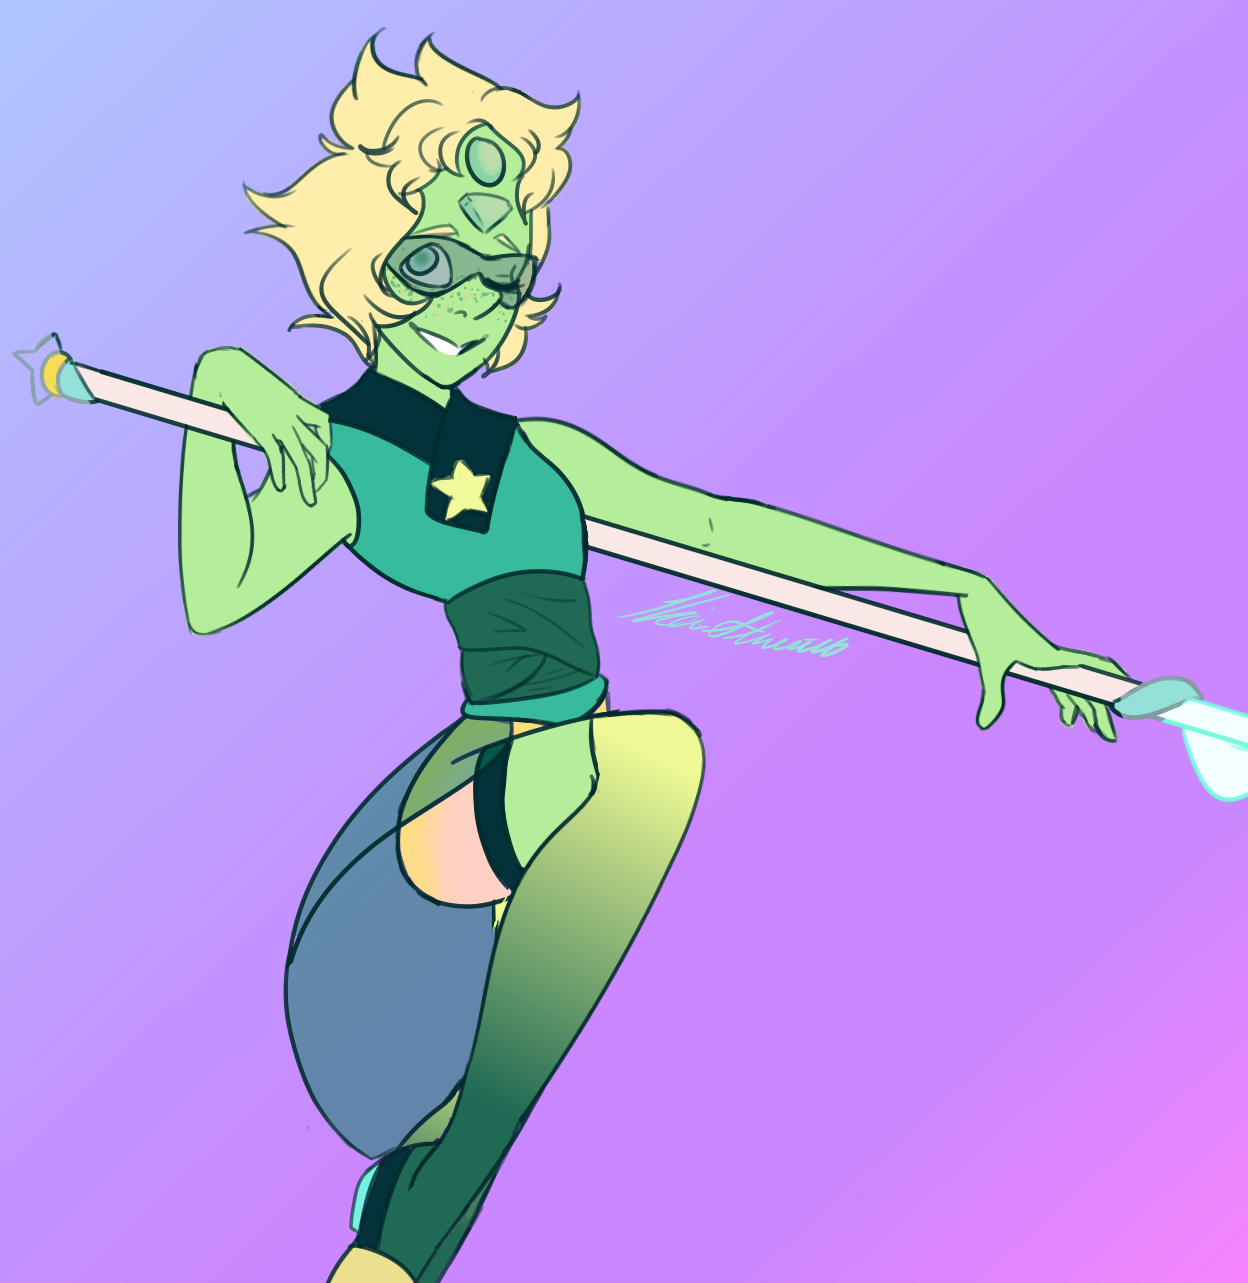 Me and @christlovez‘s fan fusion of Pearl and Peridot, Jadeite is always a favorite to draw! (it’s been too long)